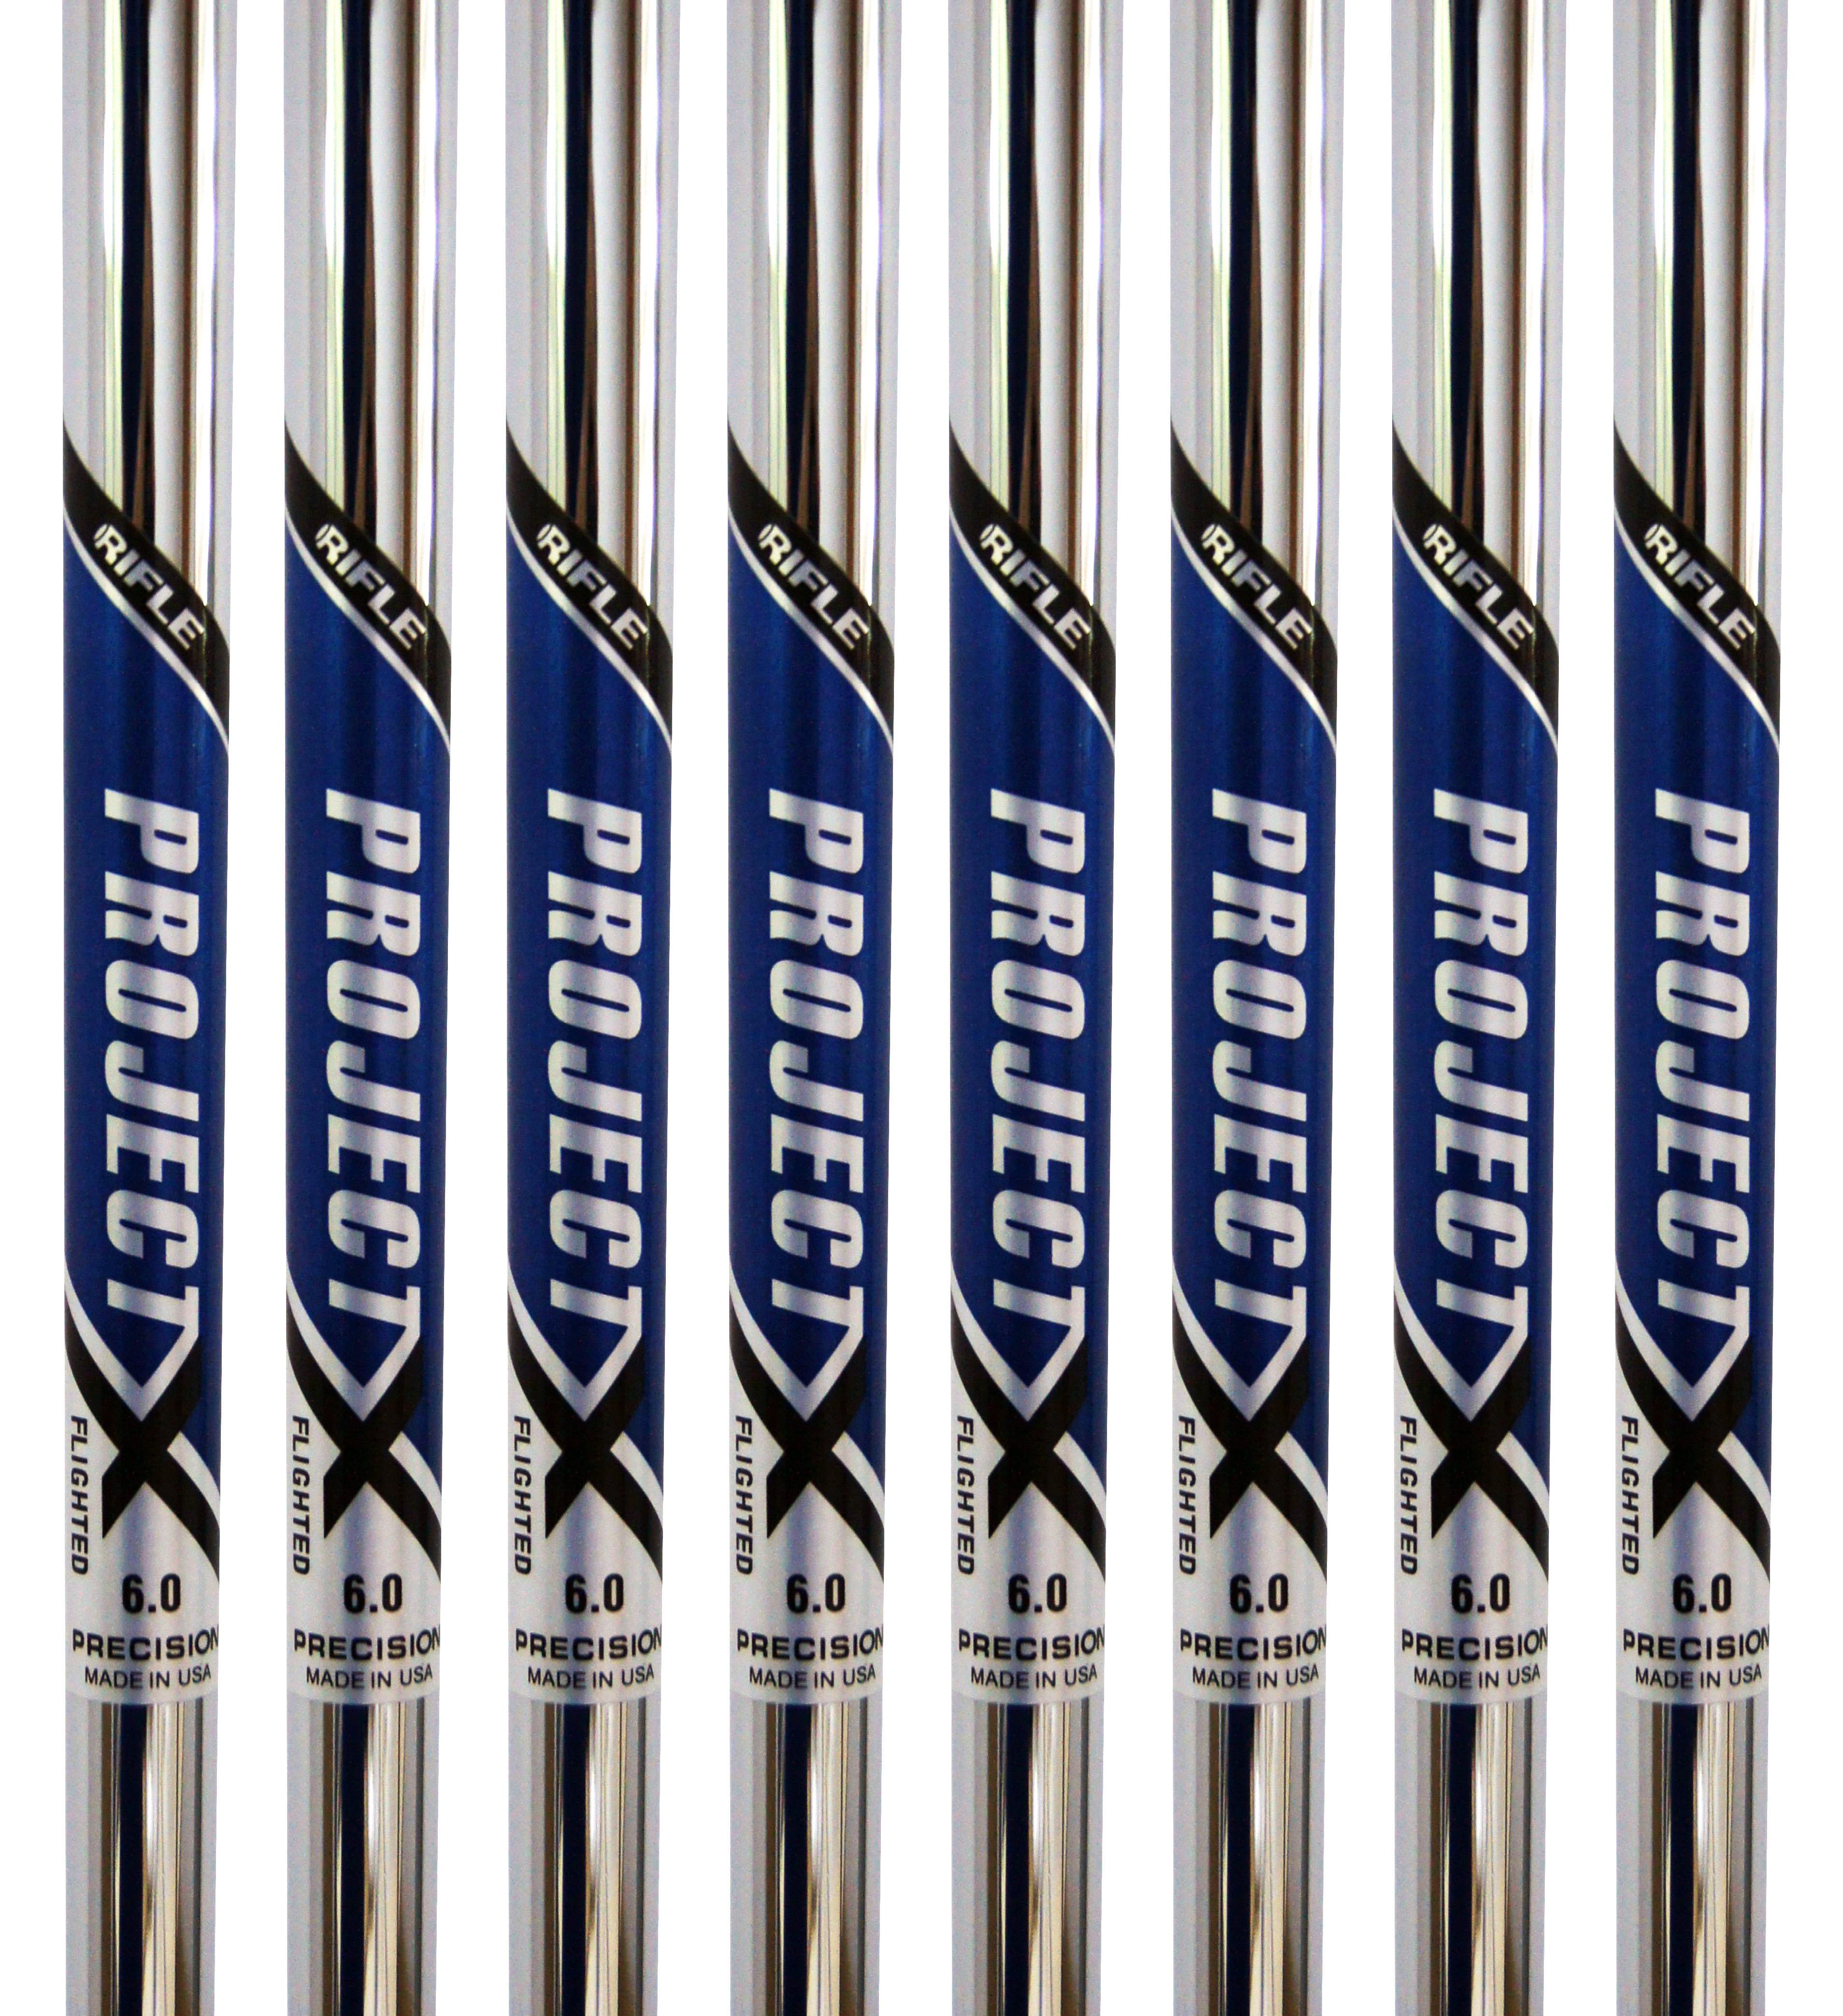 Rifle Project X Flighted Steel Iron Golf Club Shafts – Set of 8 Shafts (3-  PW)